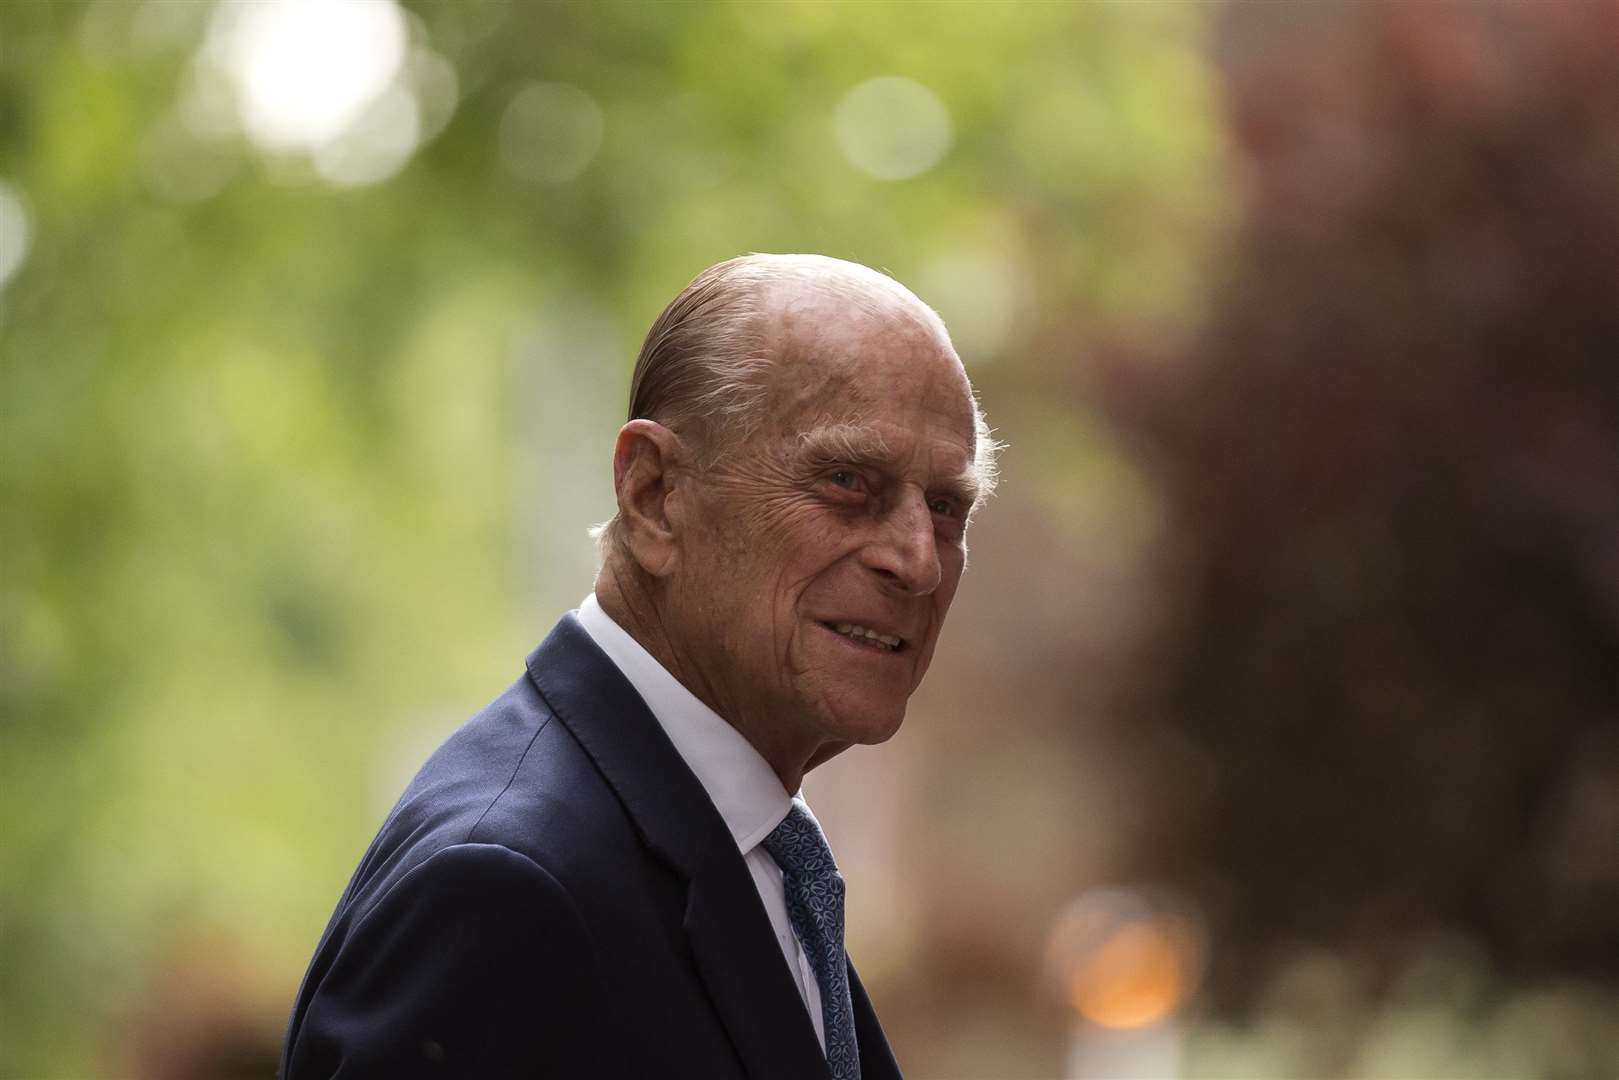 The Duke of Edinburgh arriving for his visit to Richmond Adult Community College in Richmond, south west London